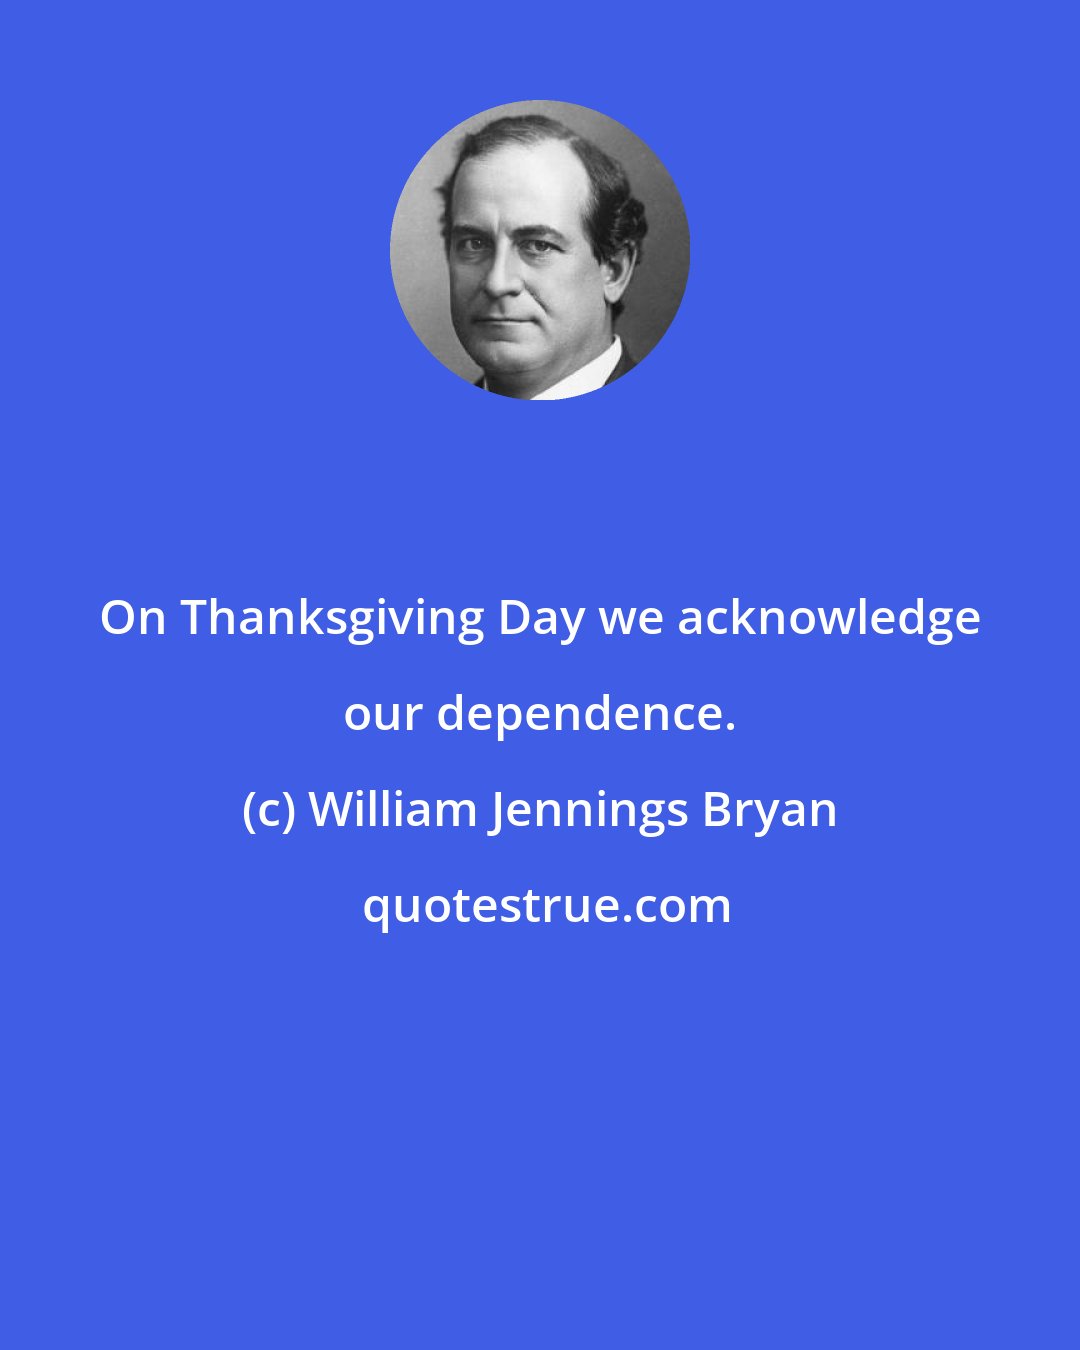 William Jennings Bryan: On Thanksgiving Day we acknowledge our dependence.